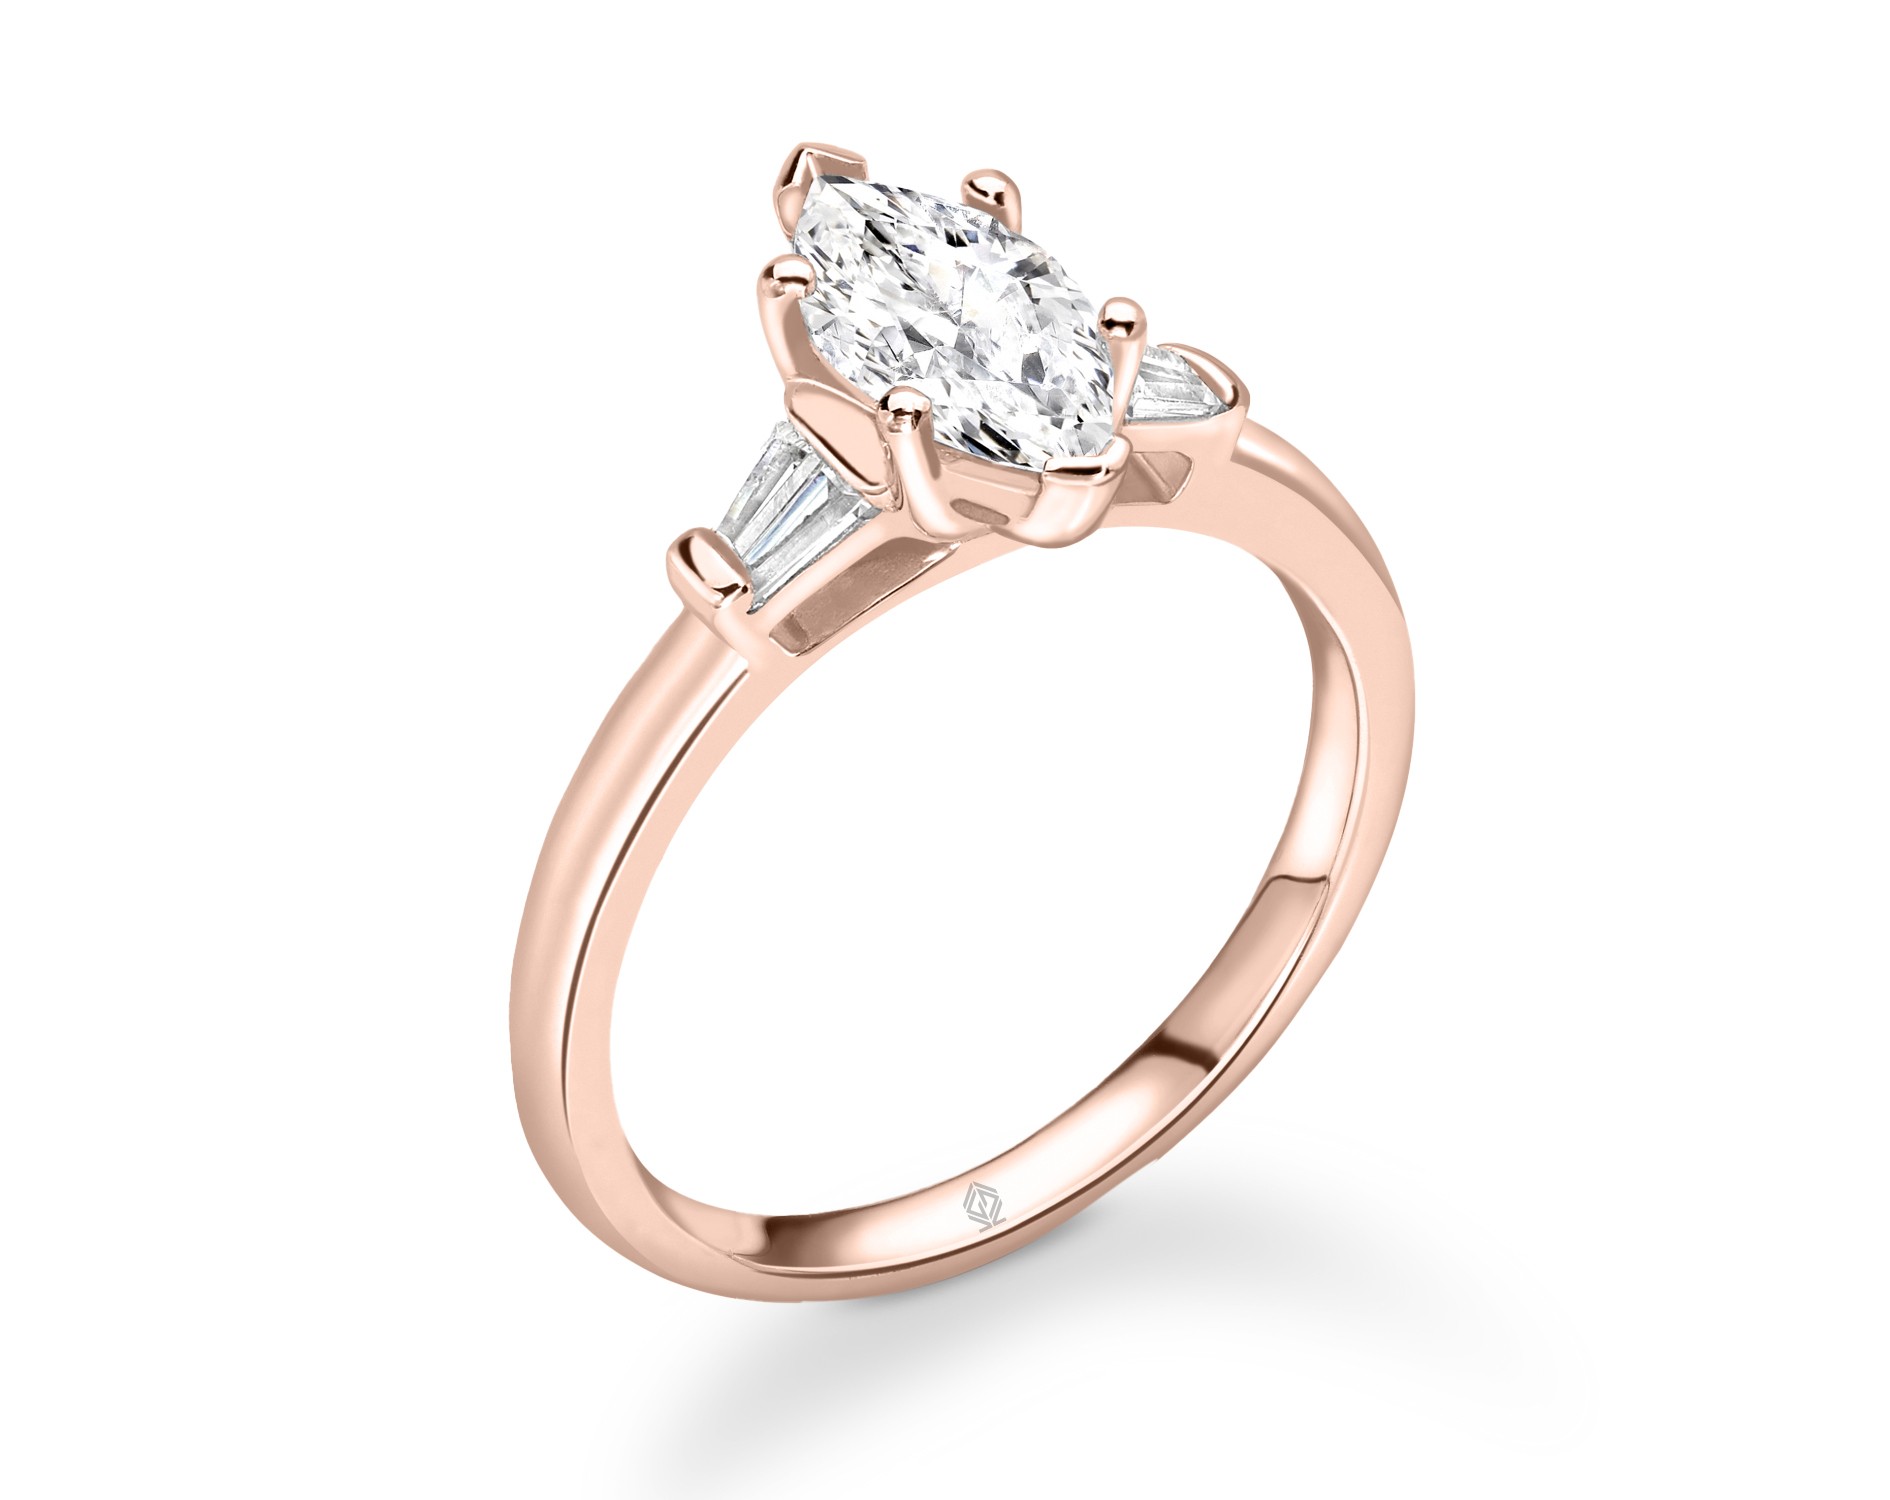 18K ROSE GOLD MARQUISE CUT DIAMOND ENGAGEMENT RING WITH BAGUETTES CUT SIDE STONES